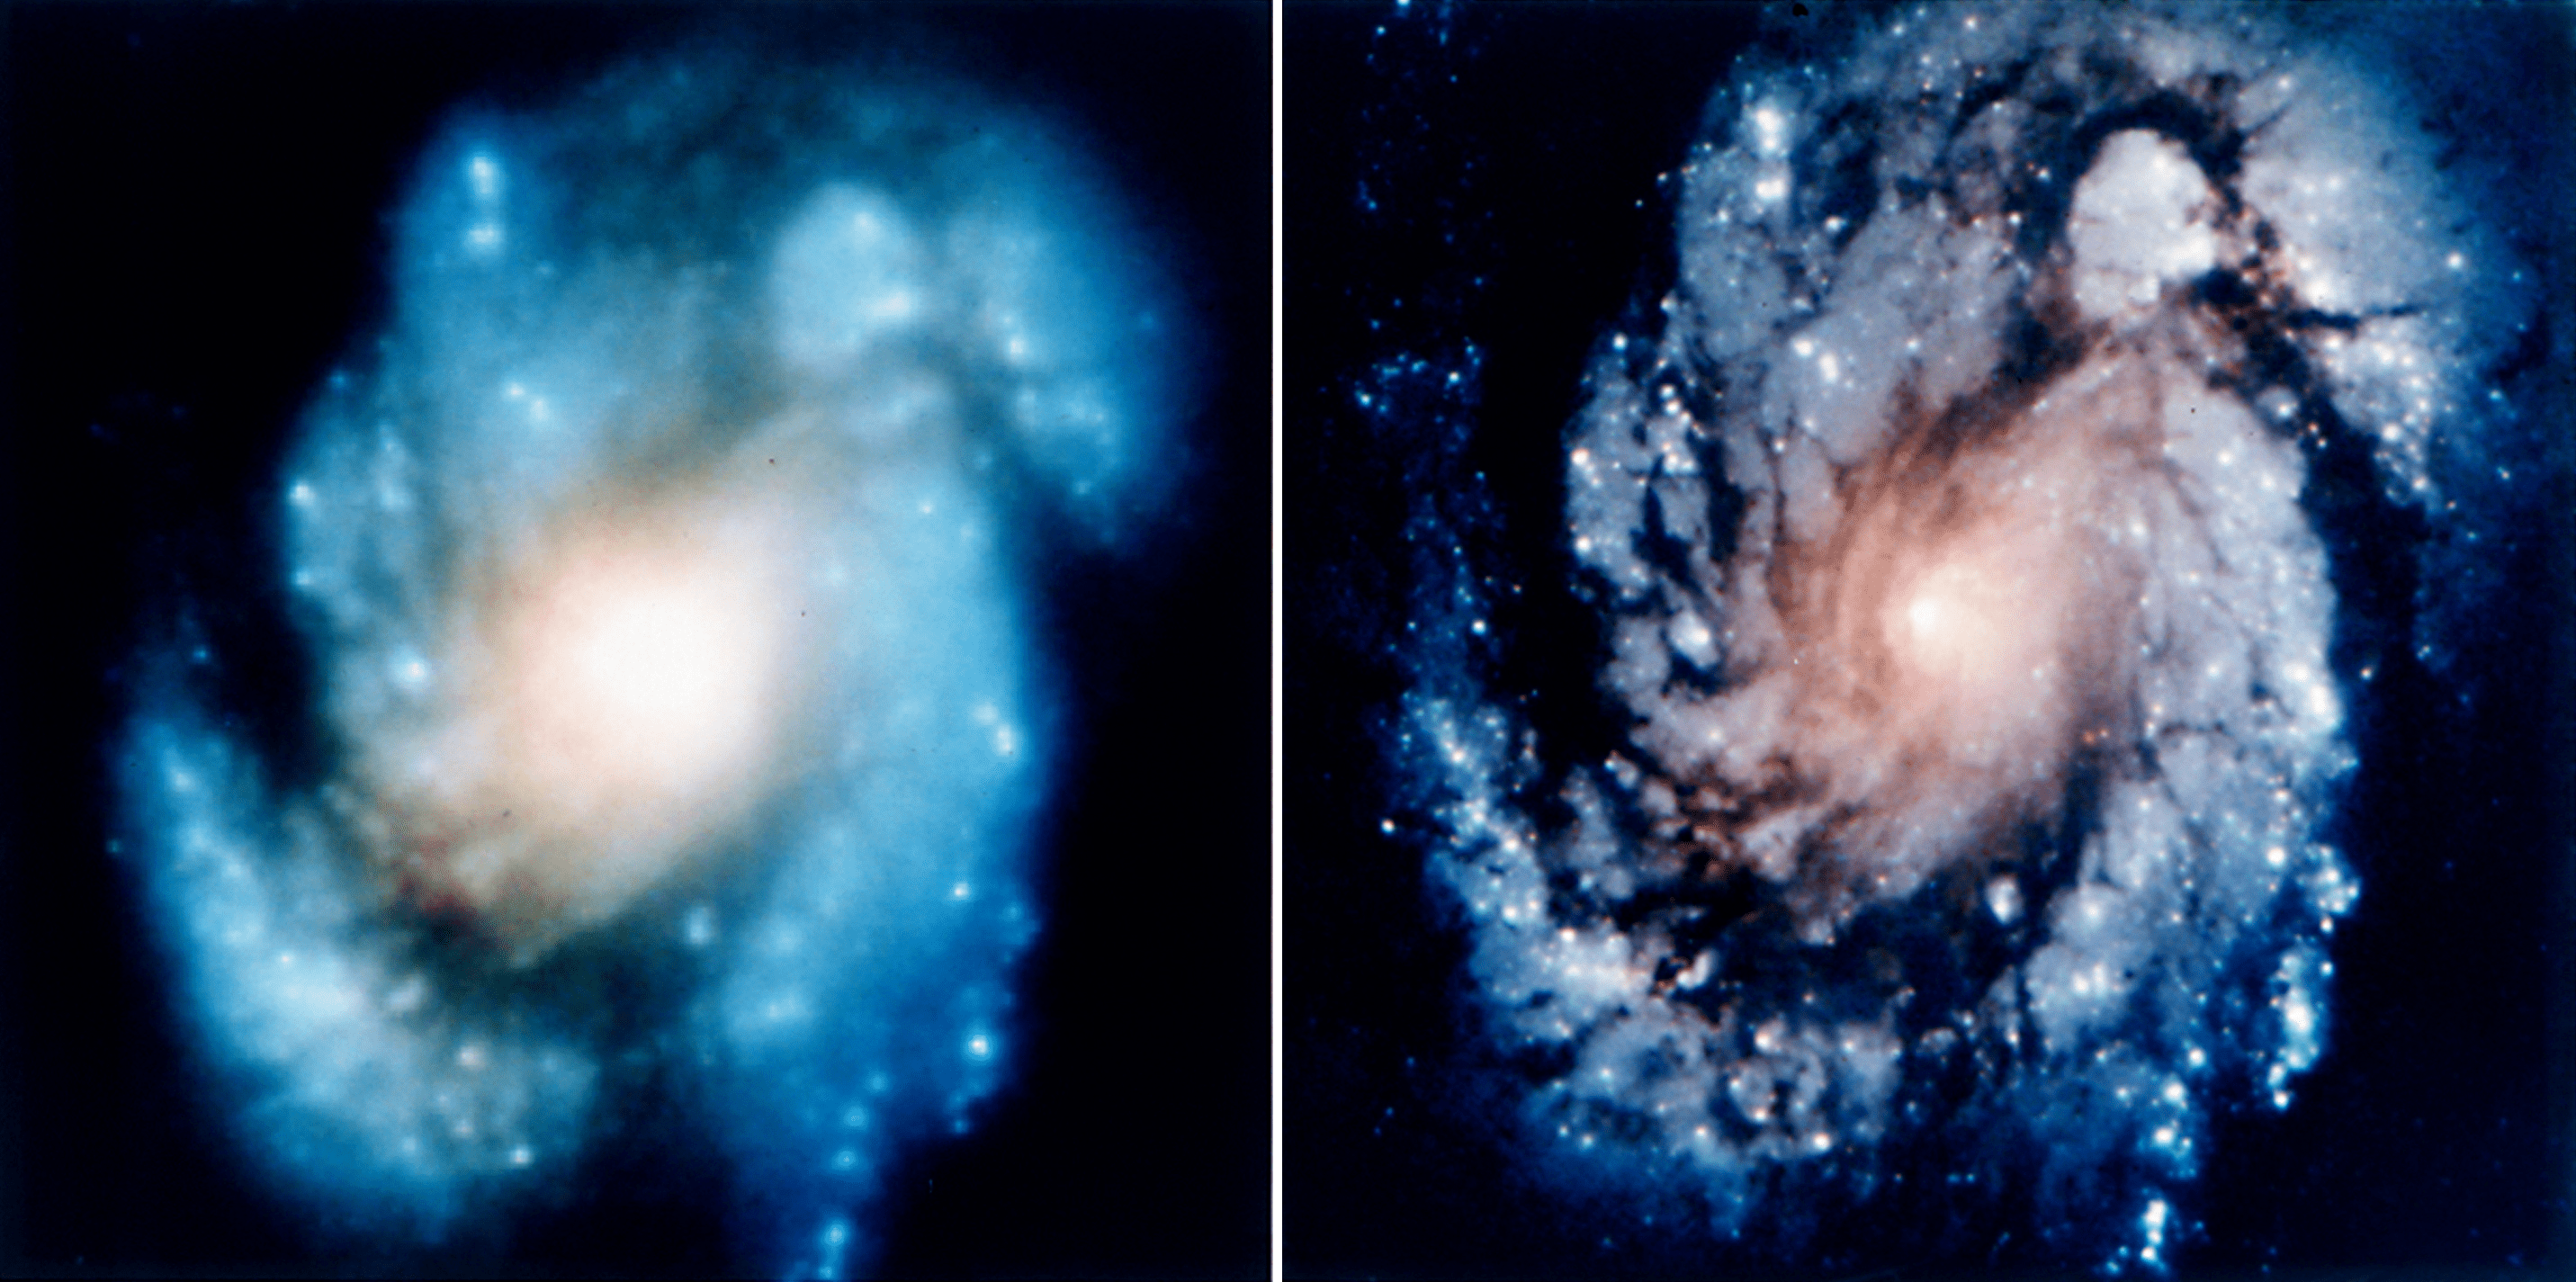 This two-pane image shows a spiral galaxy that appears blurry on the left, with cloudy arms and a hazy center. A much clearer image of the same spiral galaxy is in the panel on the right, showing a defined core and more distinct arms.